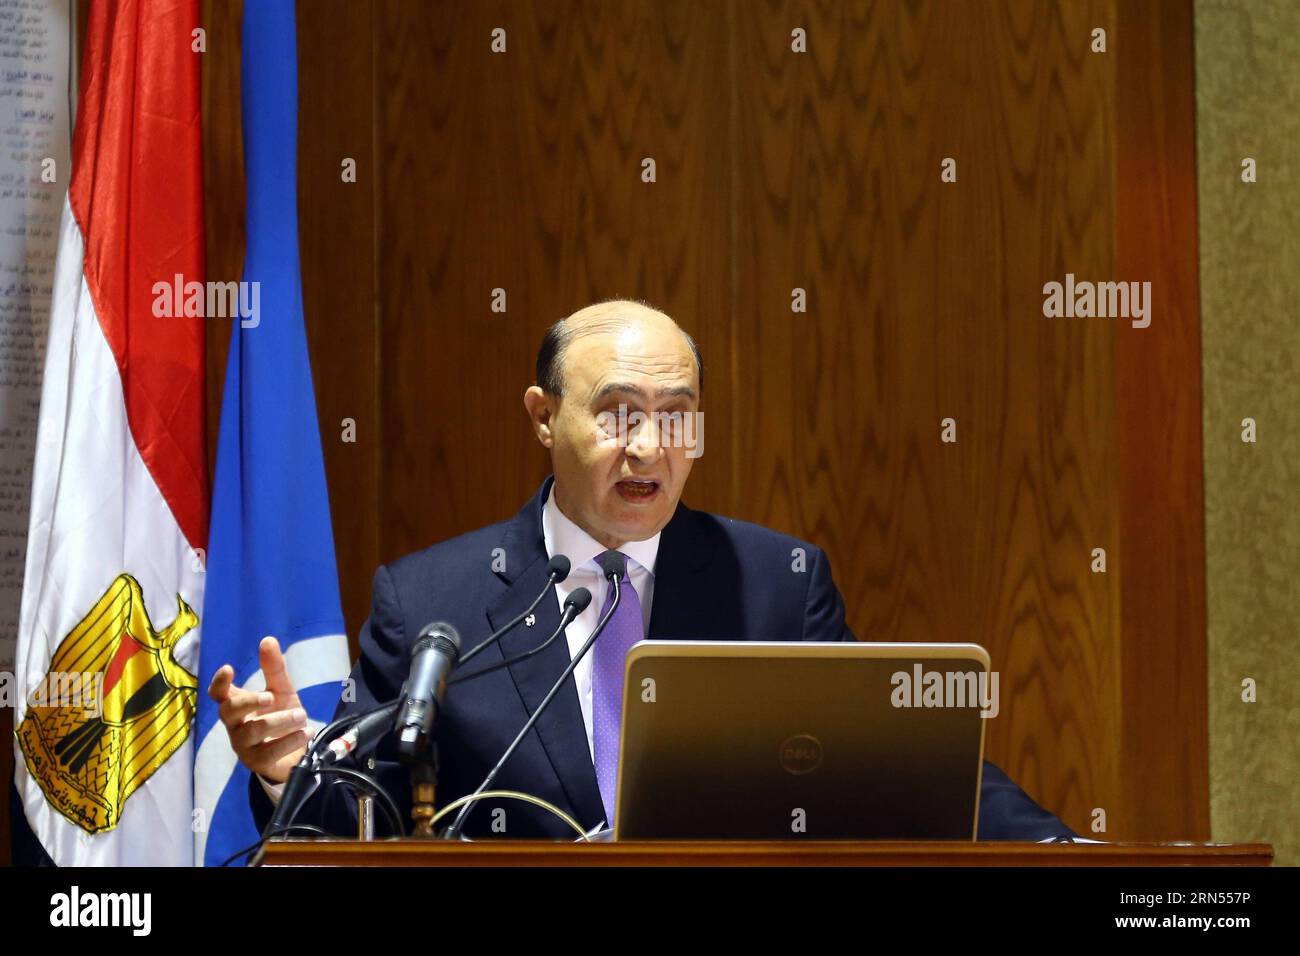 (150613) -- CAIRO, June 13, 2015 -- Chairman of the Suez Canal Authority Mohab Mamish speaks during a press conference about the new Suez Canal in Ismailia, eastern port city of Egypt, on June 13, 2015. Egypt s new Suez Canal maritime route will officially open on Aug. 6, Chairman of the Suez Canal Authority Mohab Mamish said on Saturday. ) EGYPT-ECONOMY-NEW SUEZ CANAL AhmedxGomaa PUBLICATIONxNOTxINxCHN   Cairo June 13 2015 Chairman of The Suez Canal Authority   Speaks during a Press Conference About The New Suez Canal in Ismailia Eastern Port City of Egypt ON June 13 2015 Egypt S New Suez Can Stock Photo